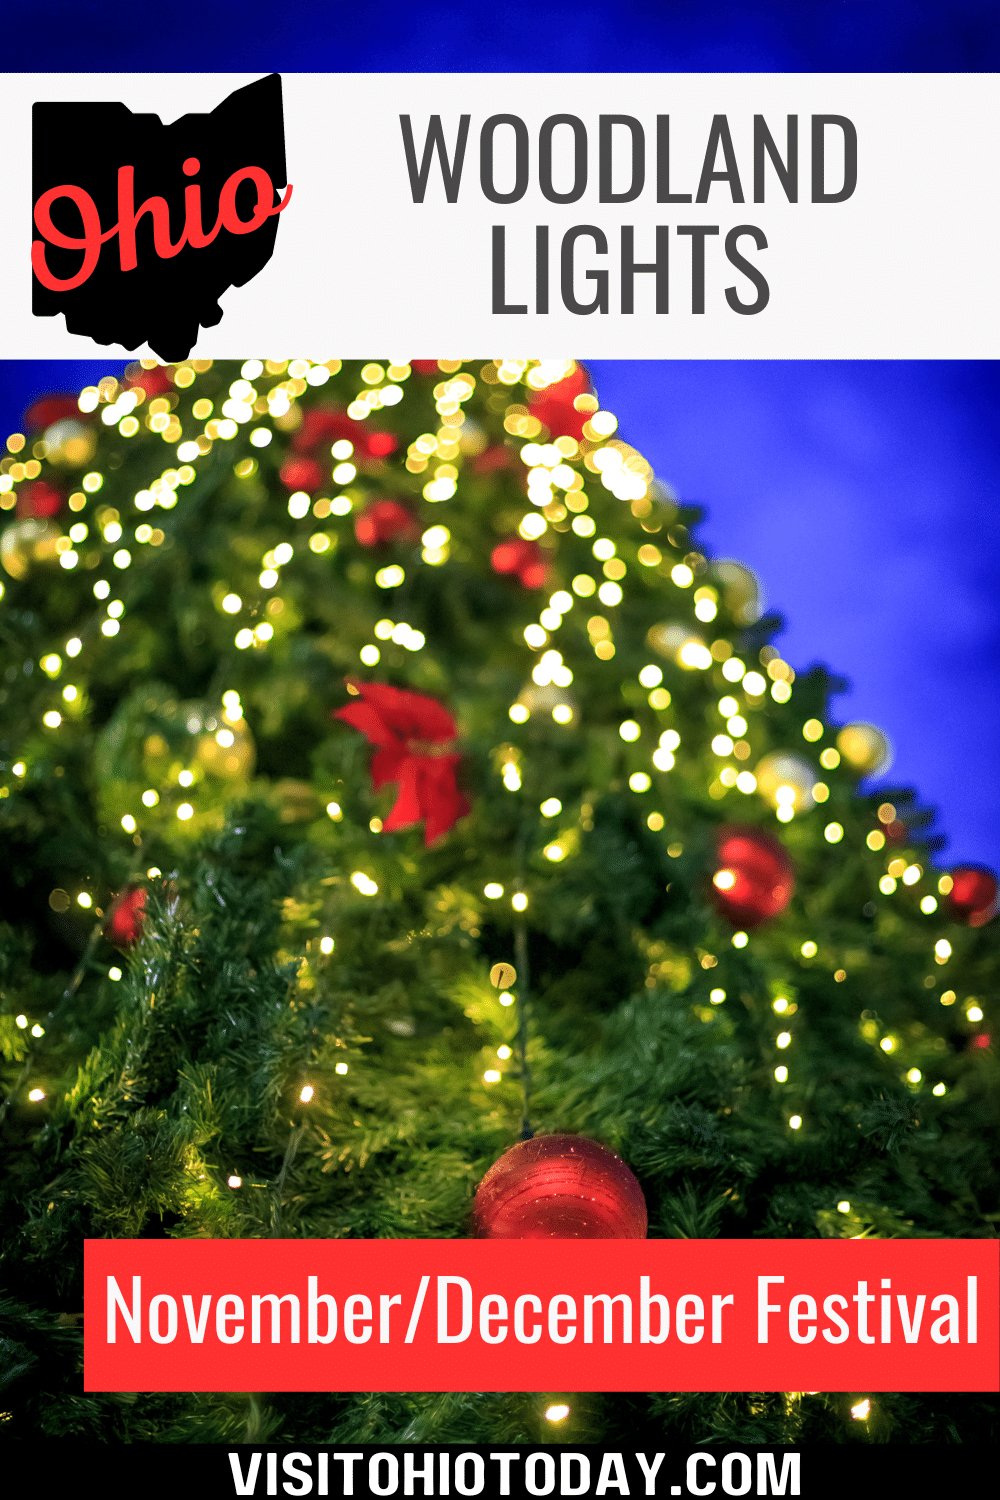 Woodland Lights is a half-mile of fantasy holiday lights and displays.